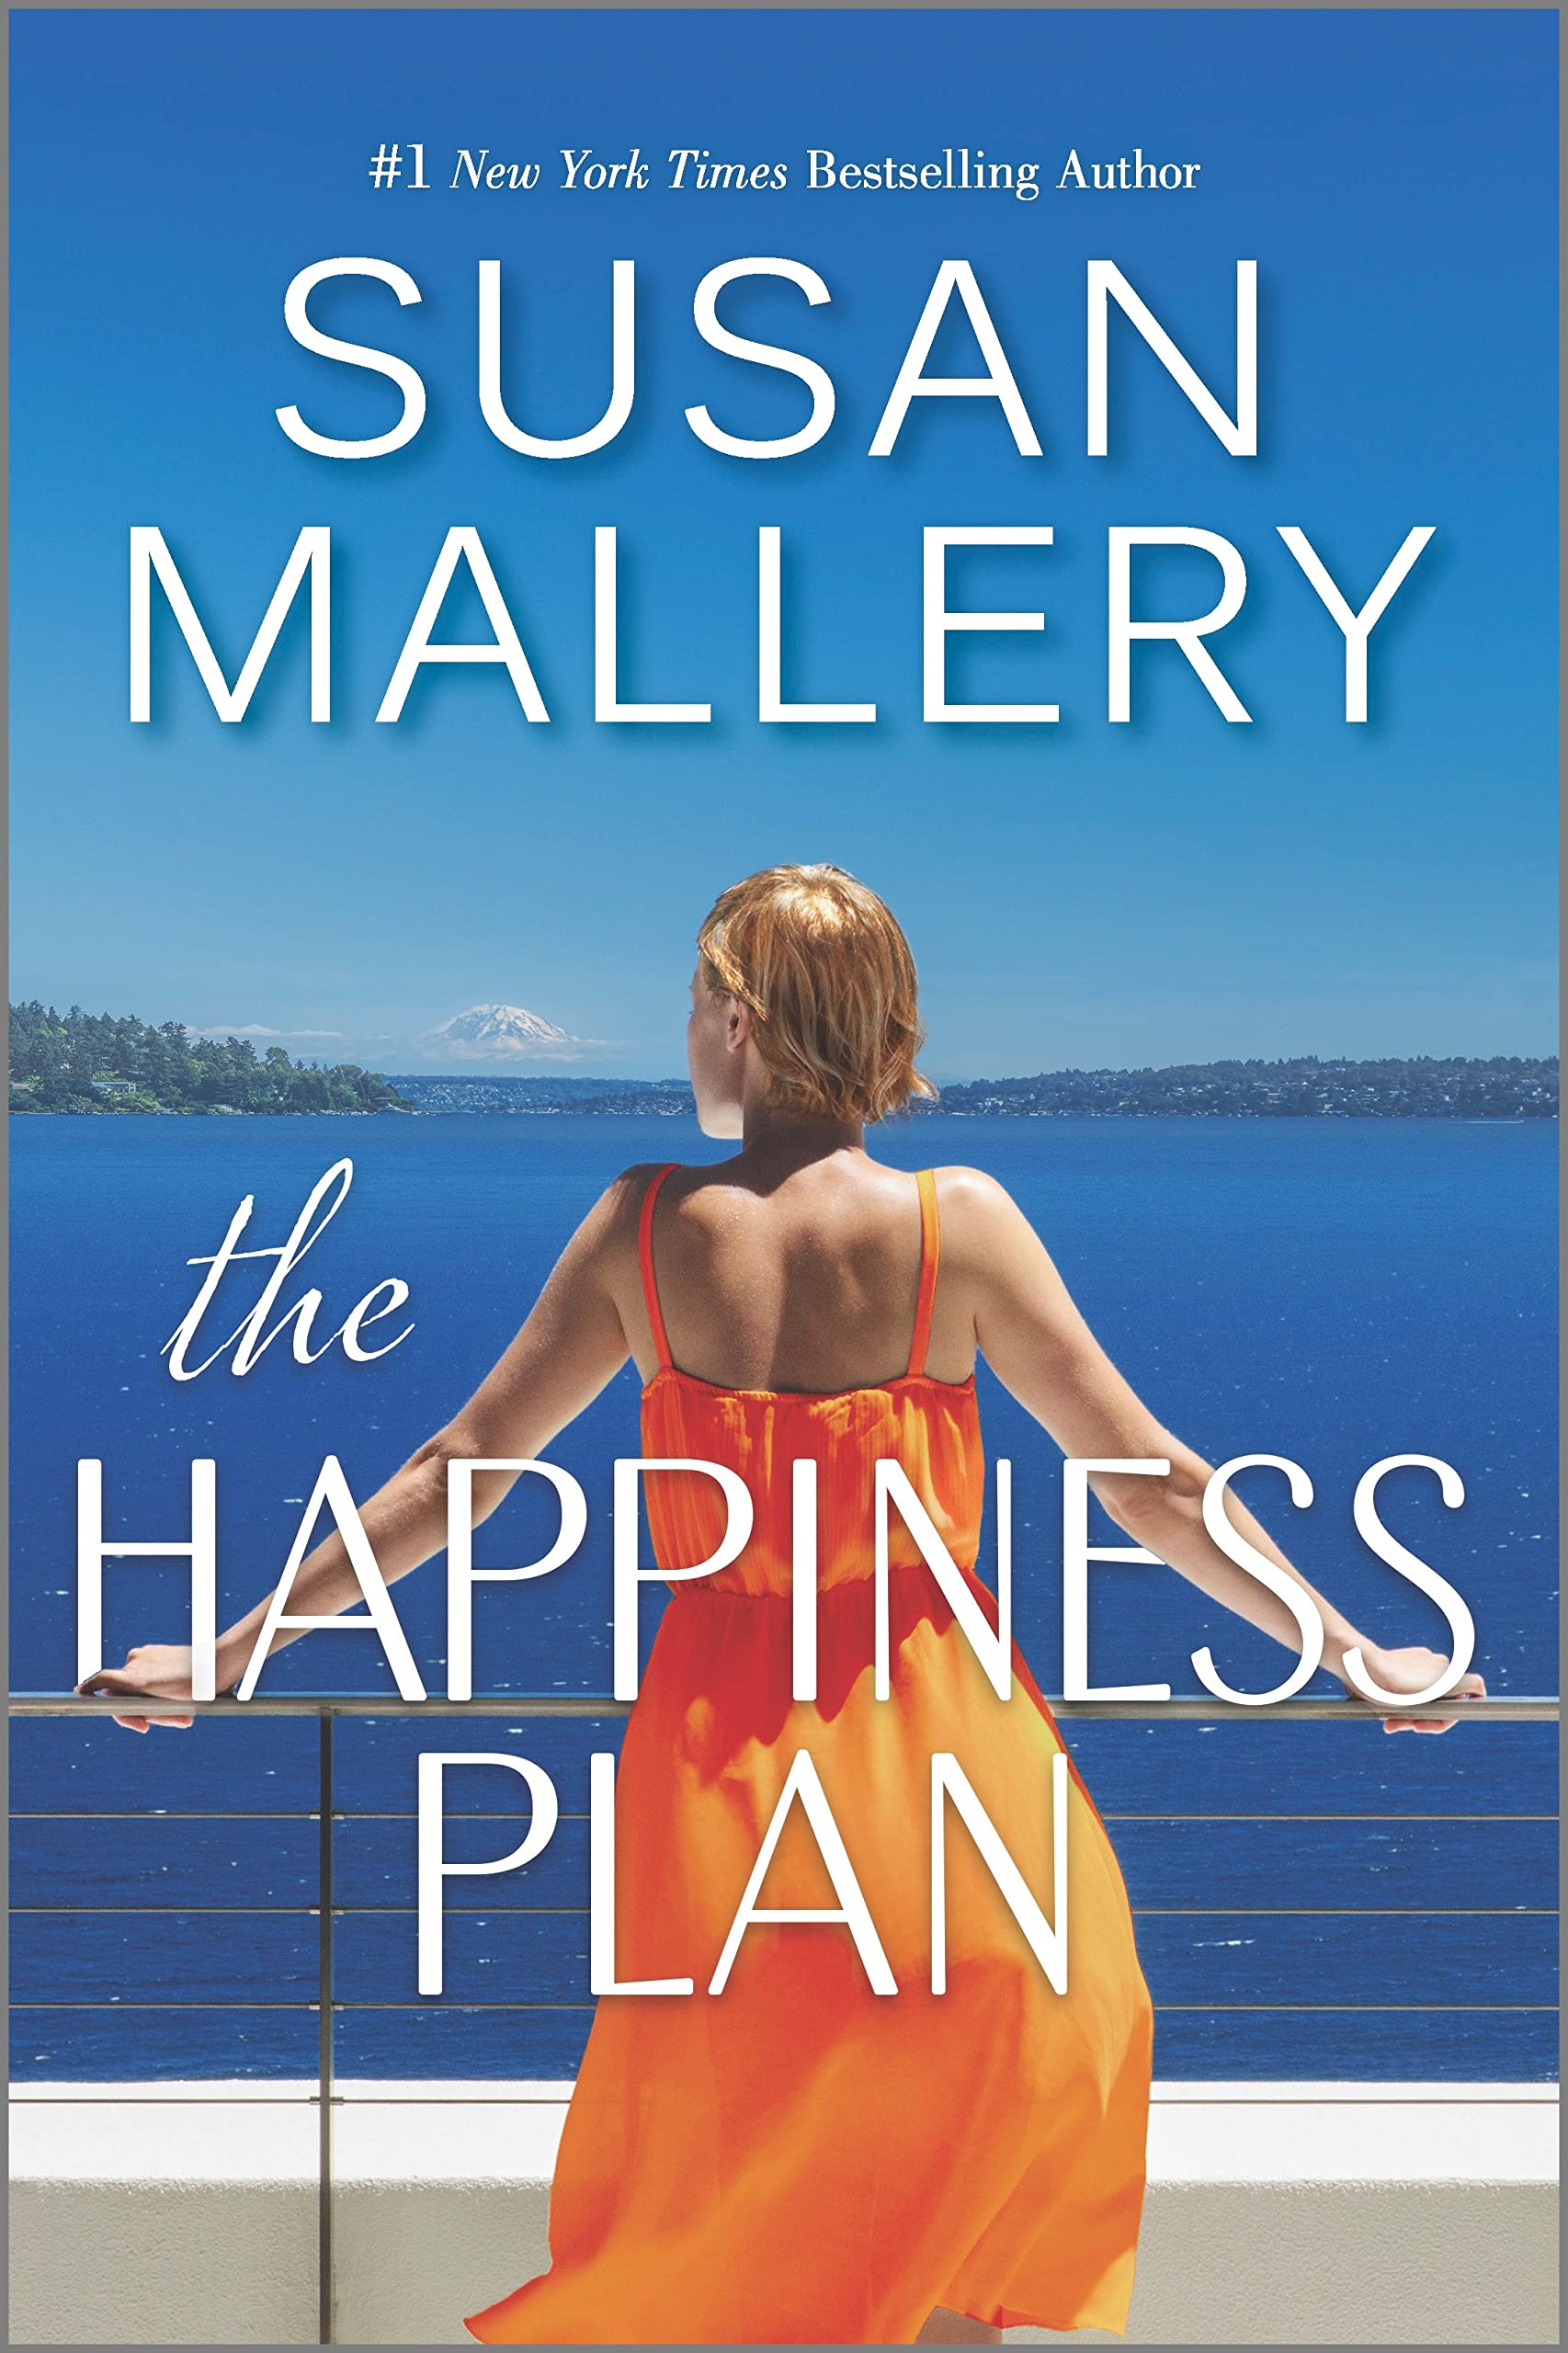 Image for "The Happiness Plan"